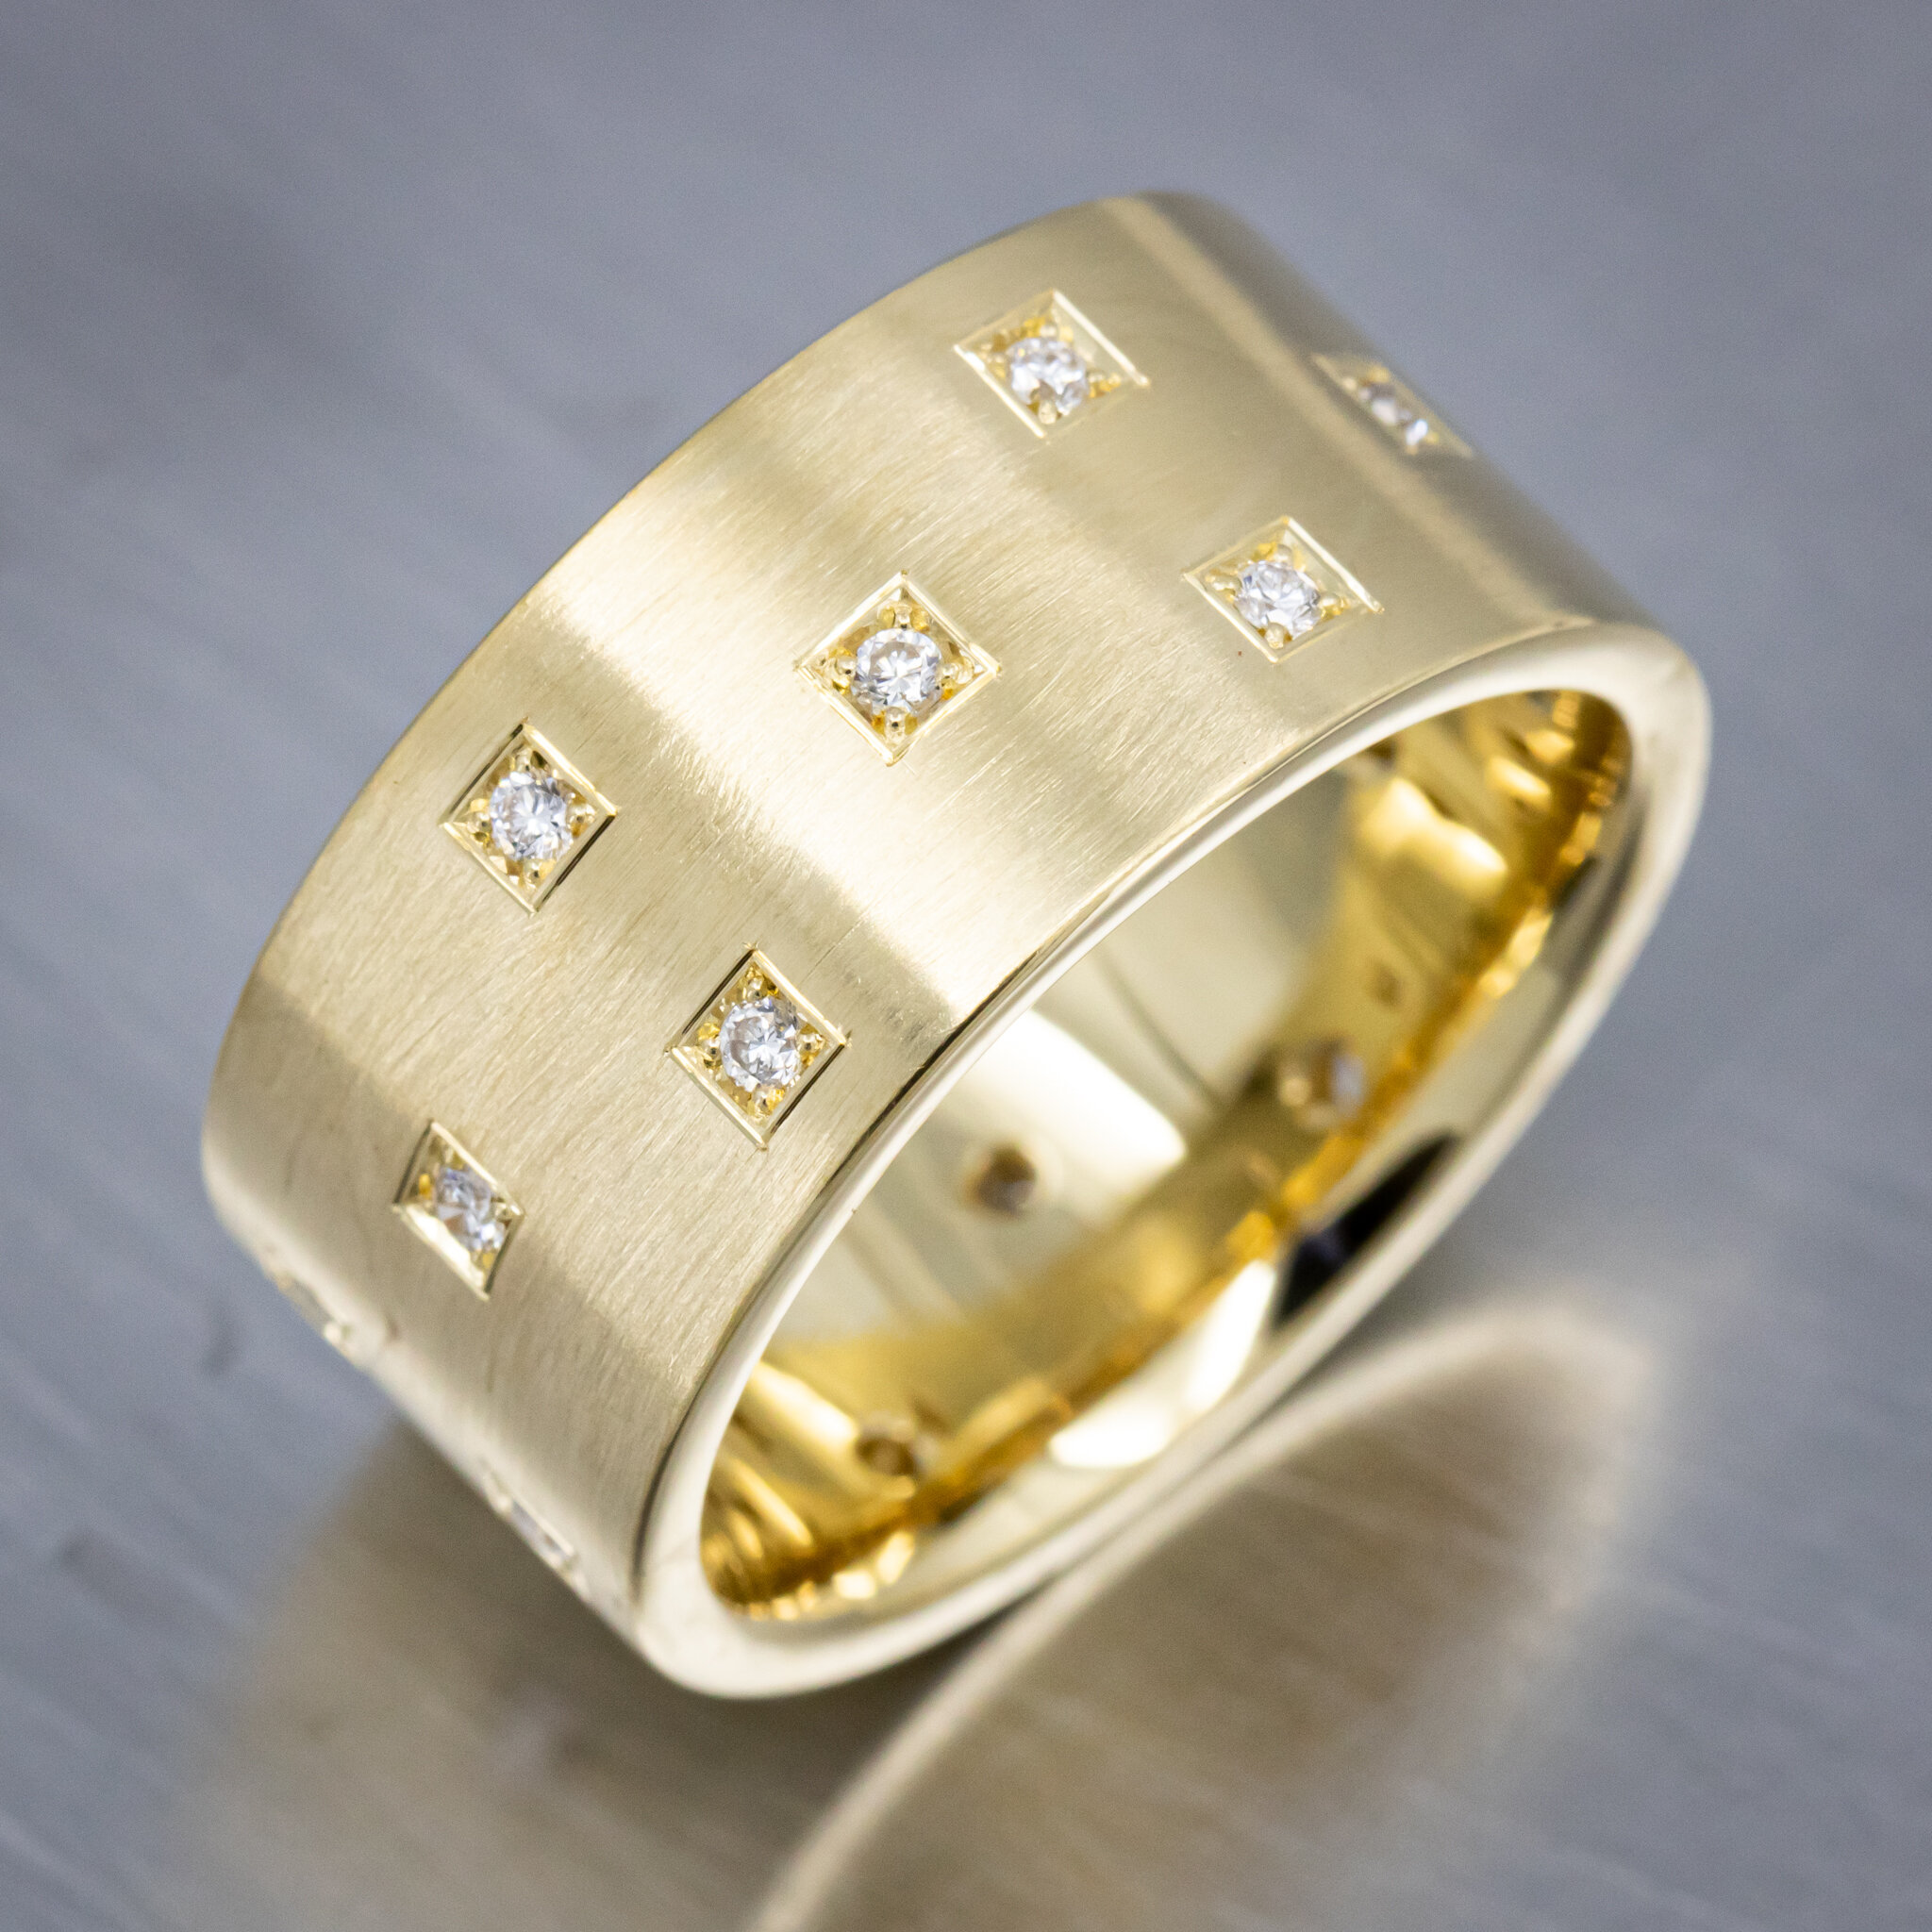 18k Yellow Gold Band with melee Diamonds bead set into decorative Square Forms all around the ring with a Satin Brushed Finish

View more custom creations online at:
https://thisringstrue.com/custombridal